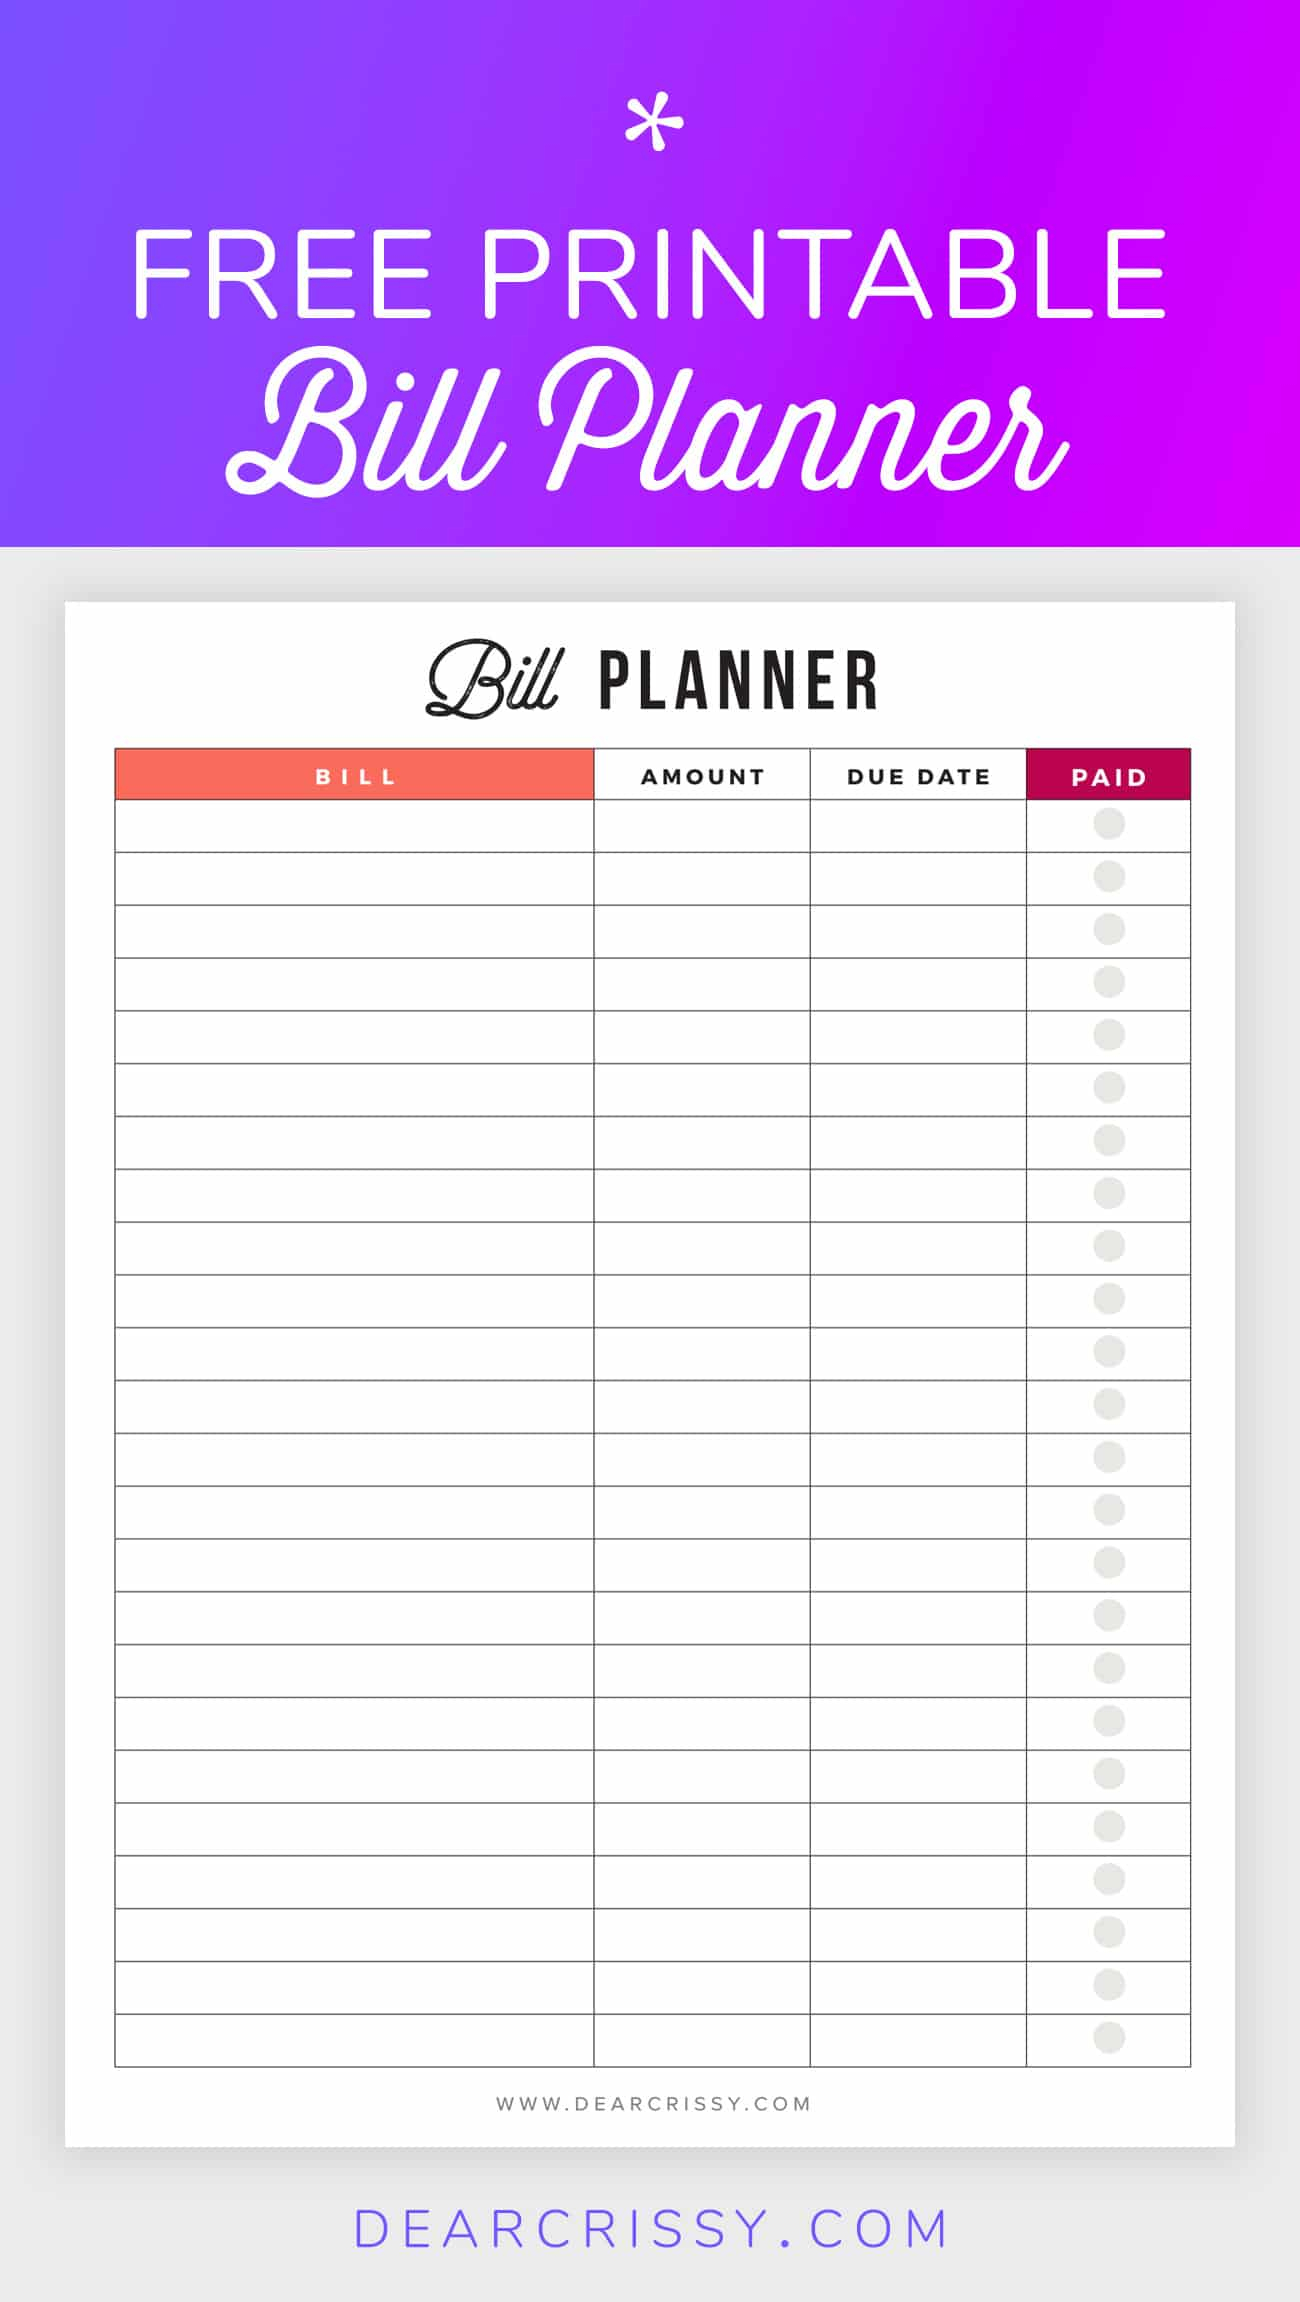 Bill Planner Late Hashtag Bg Free Printable Monthly Budget